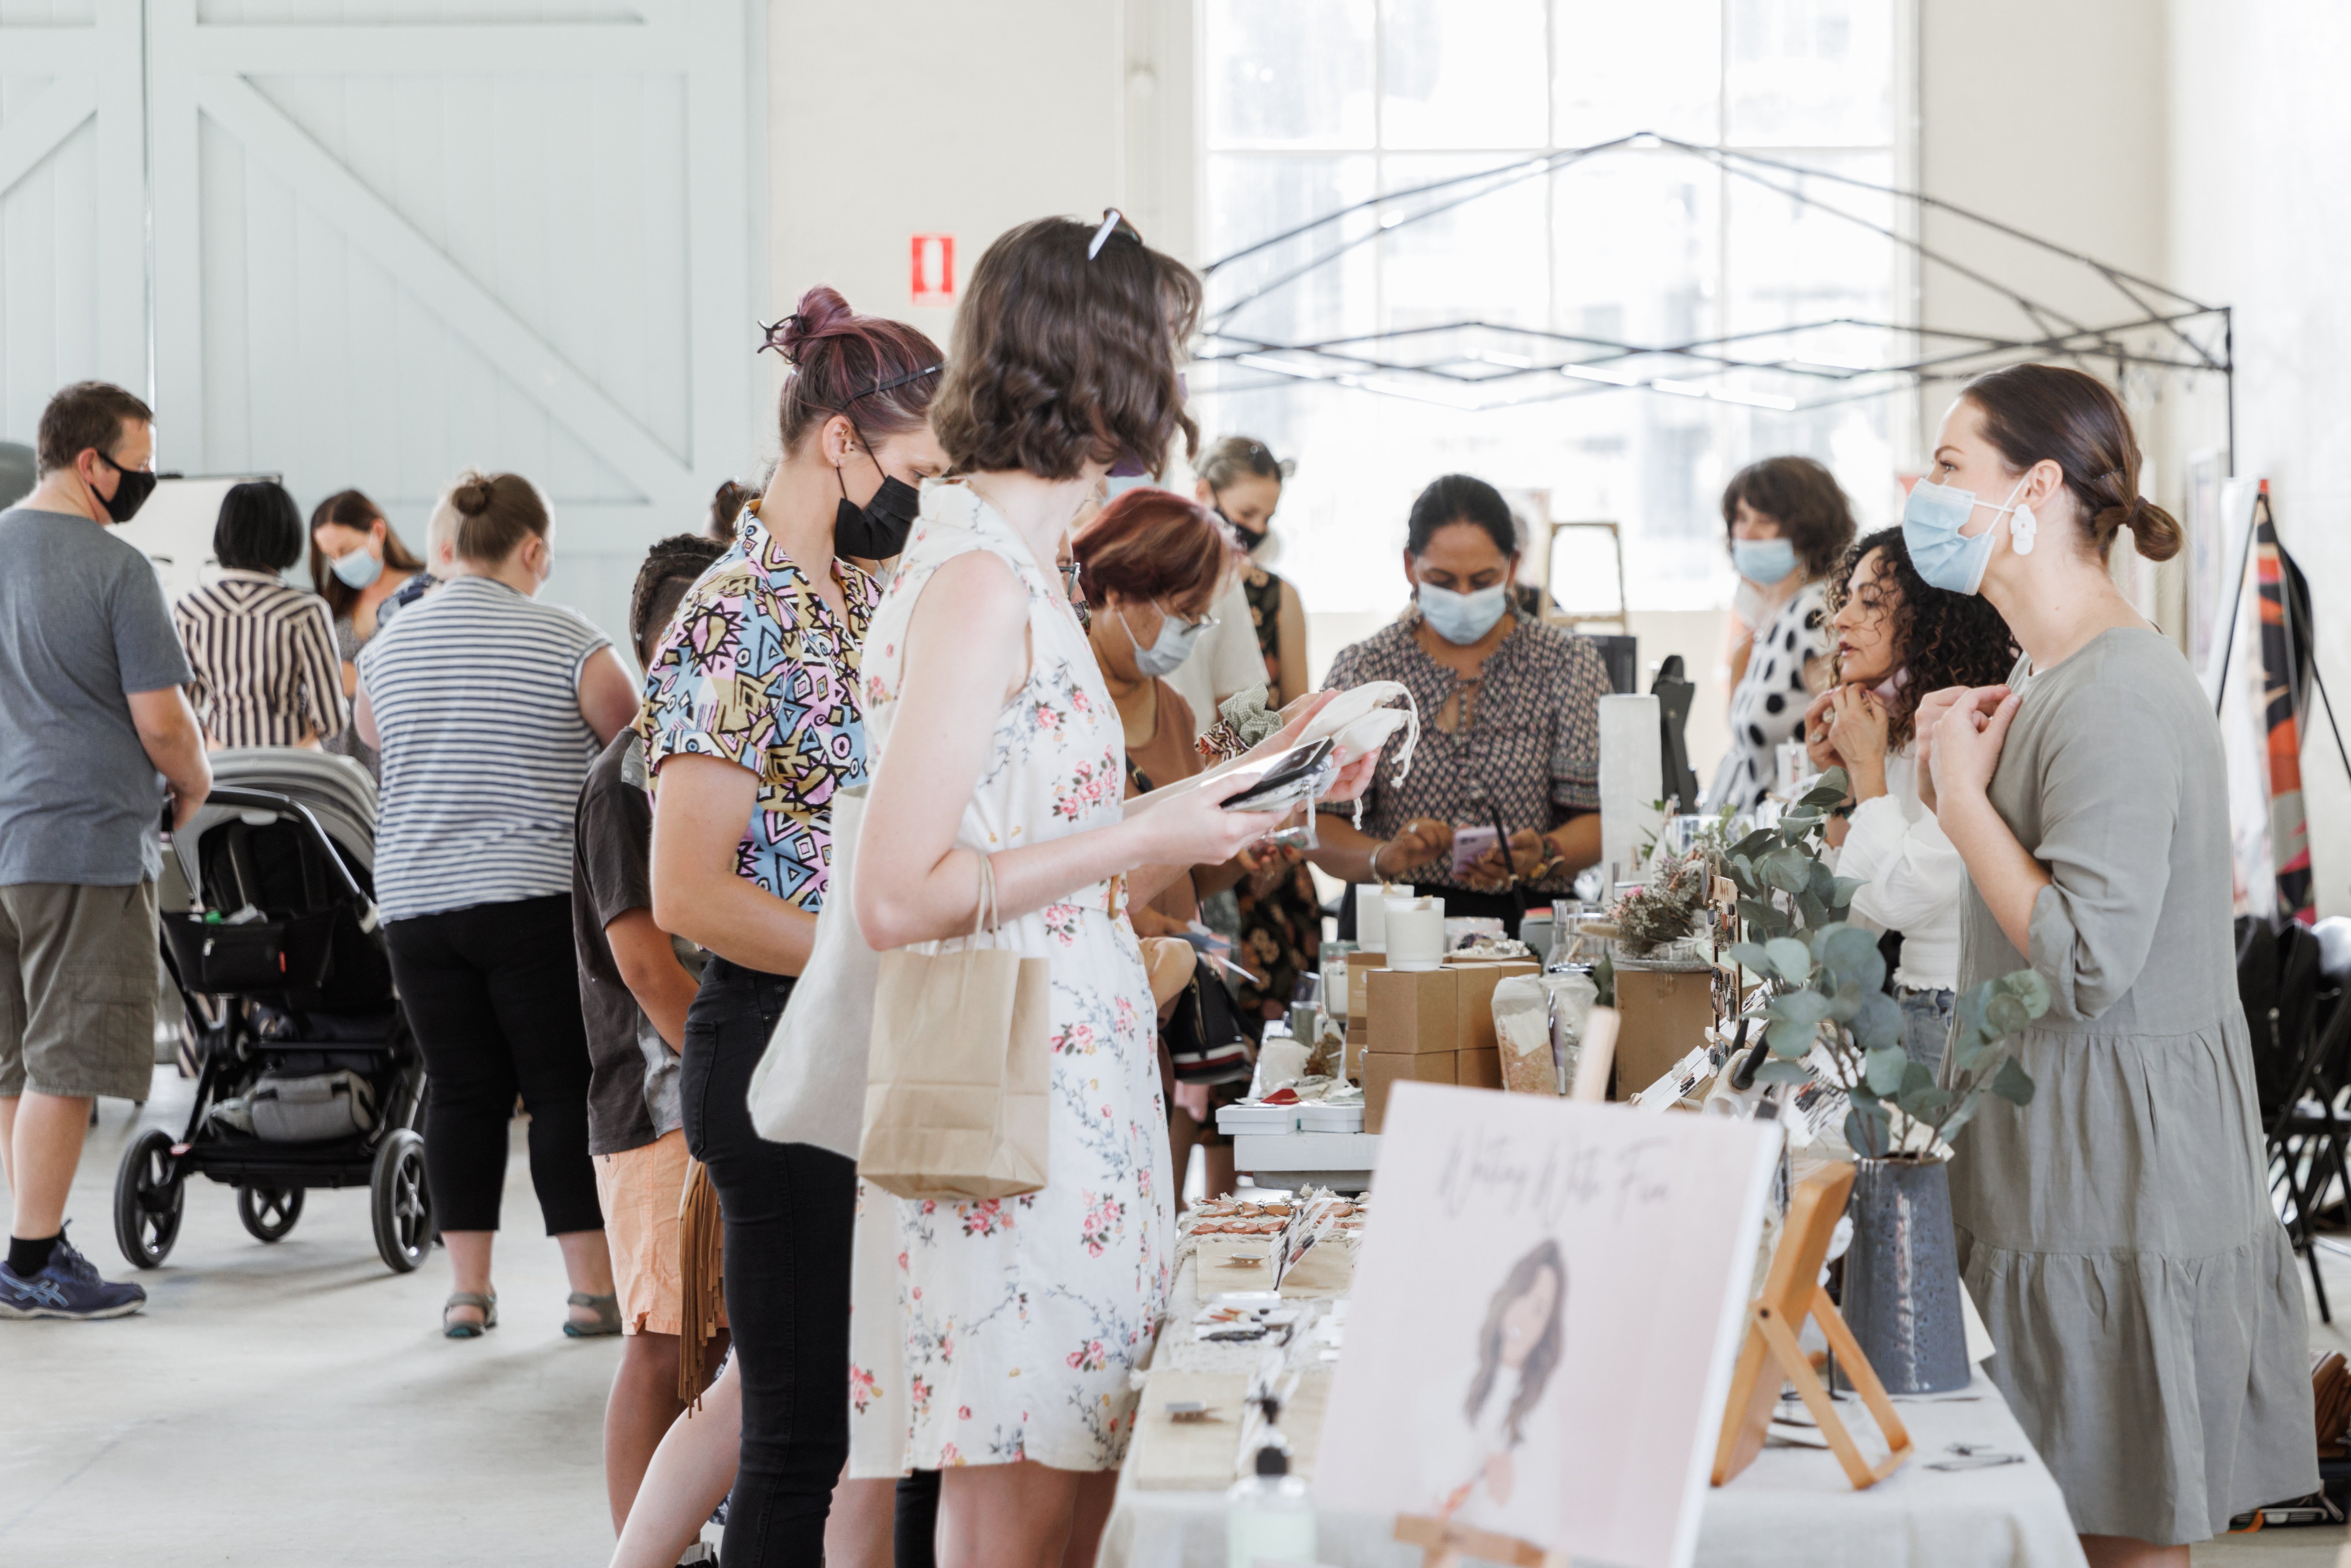 Women-inspired boutique market heads back to Canberra